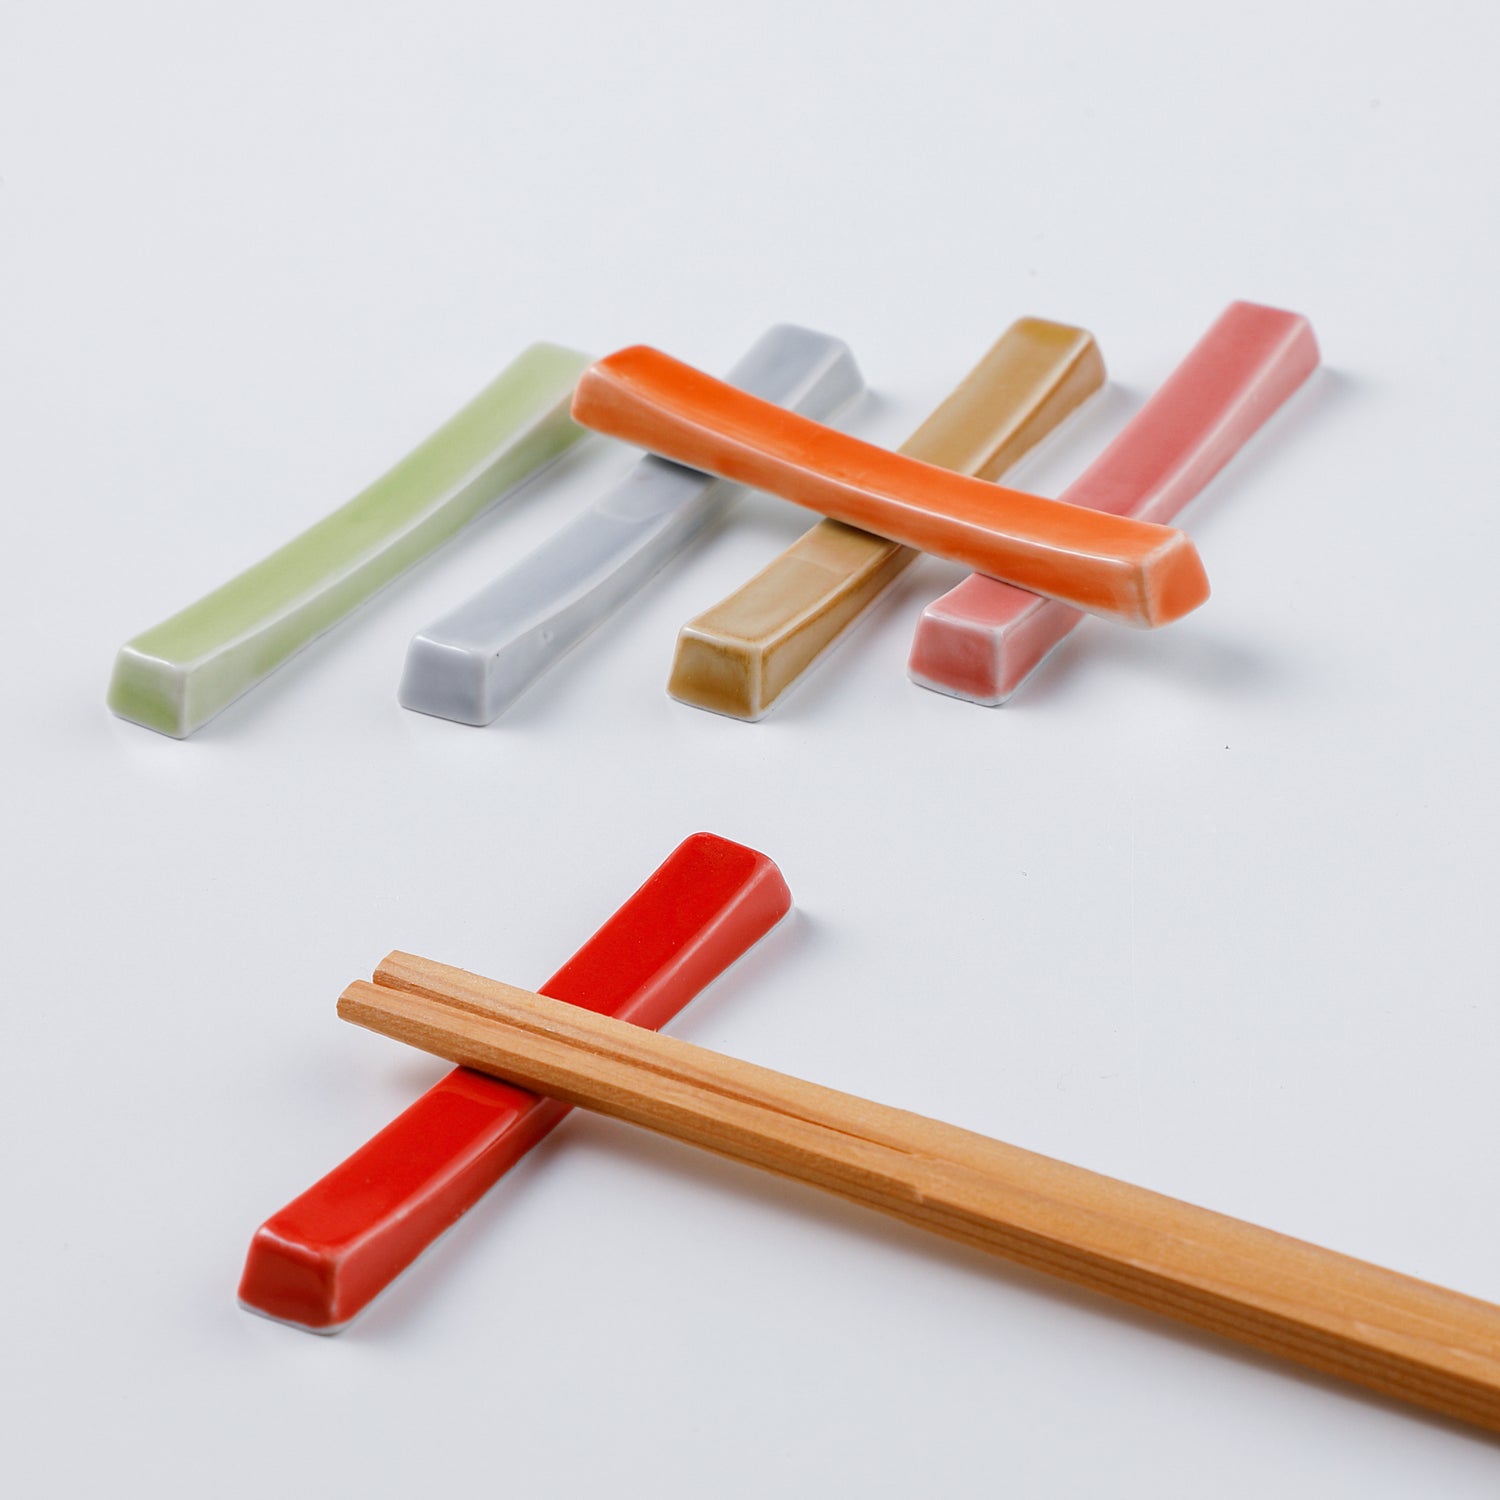 Chopsticks and Cutlery Rests